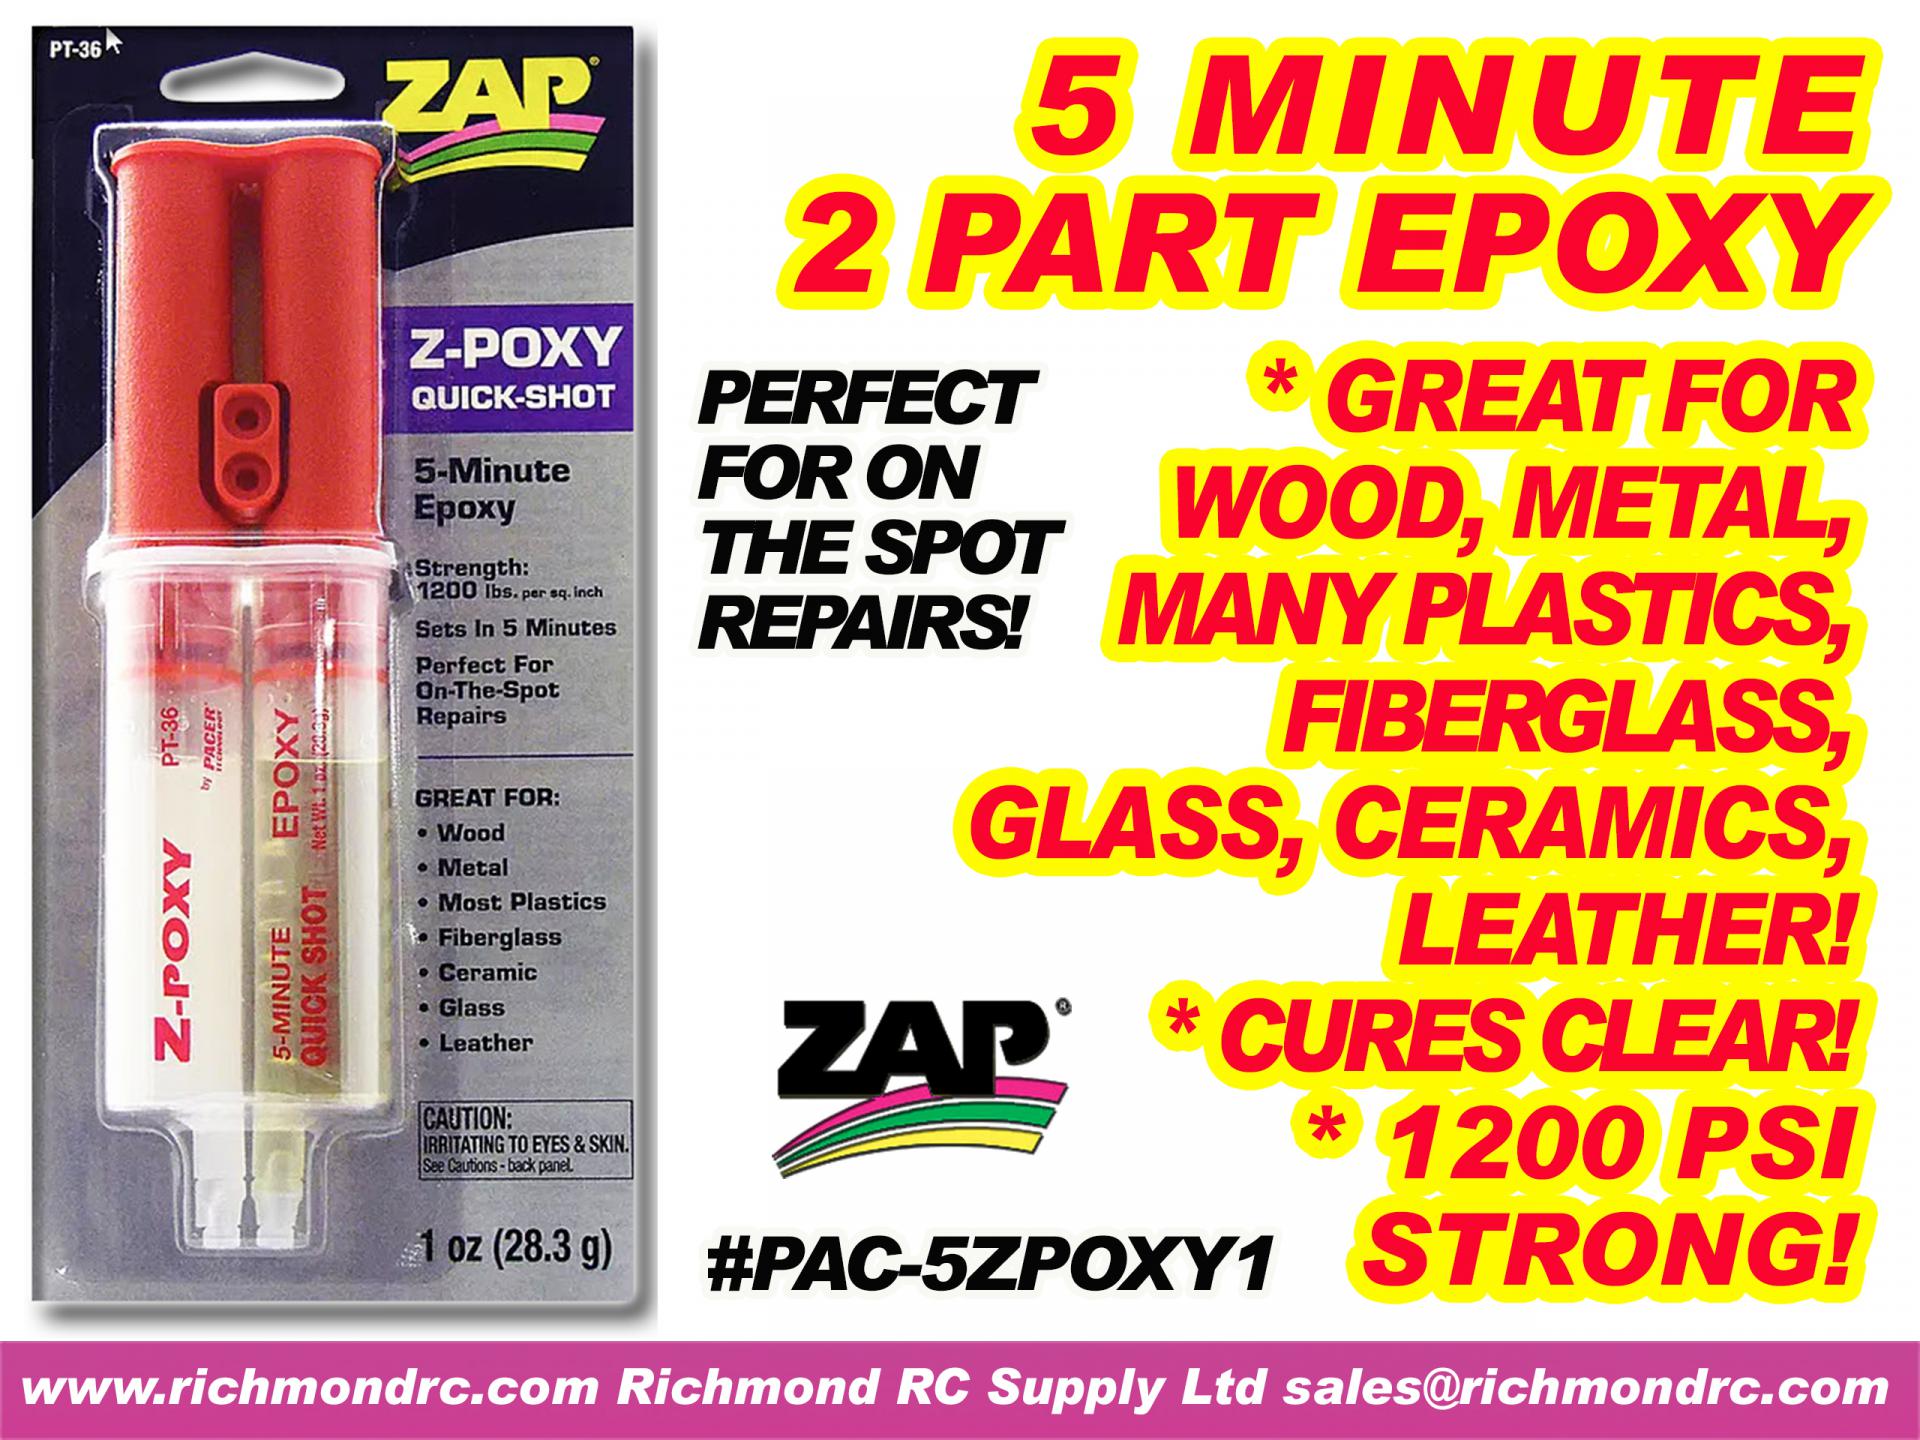 PACER -  5 MINUTE Z-POXY SYRINGE - 28ml 1oz PT-36 {pac-prices}